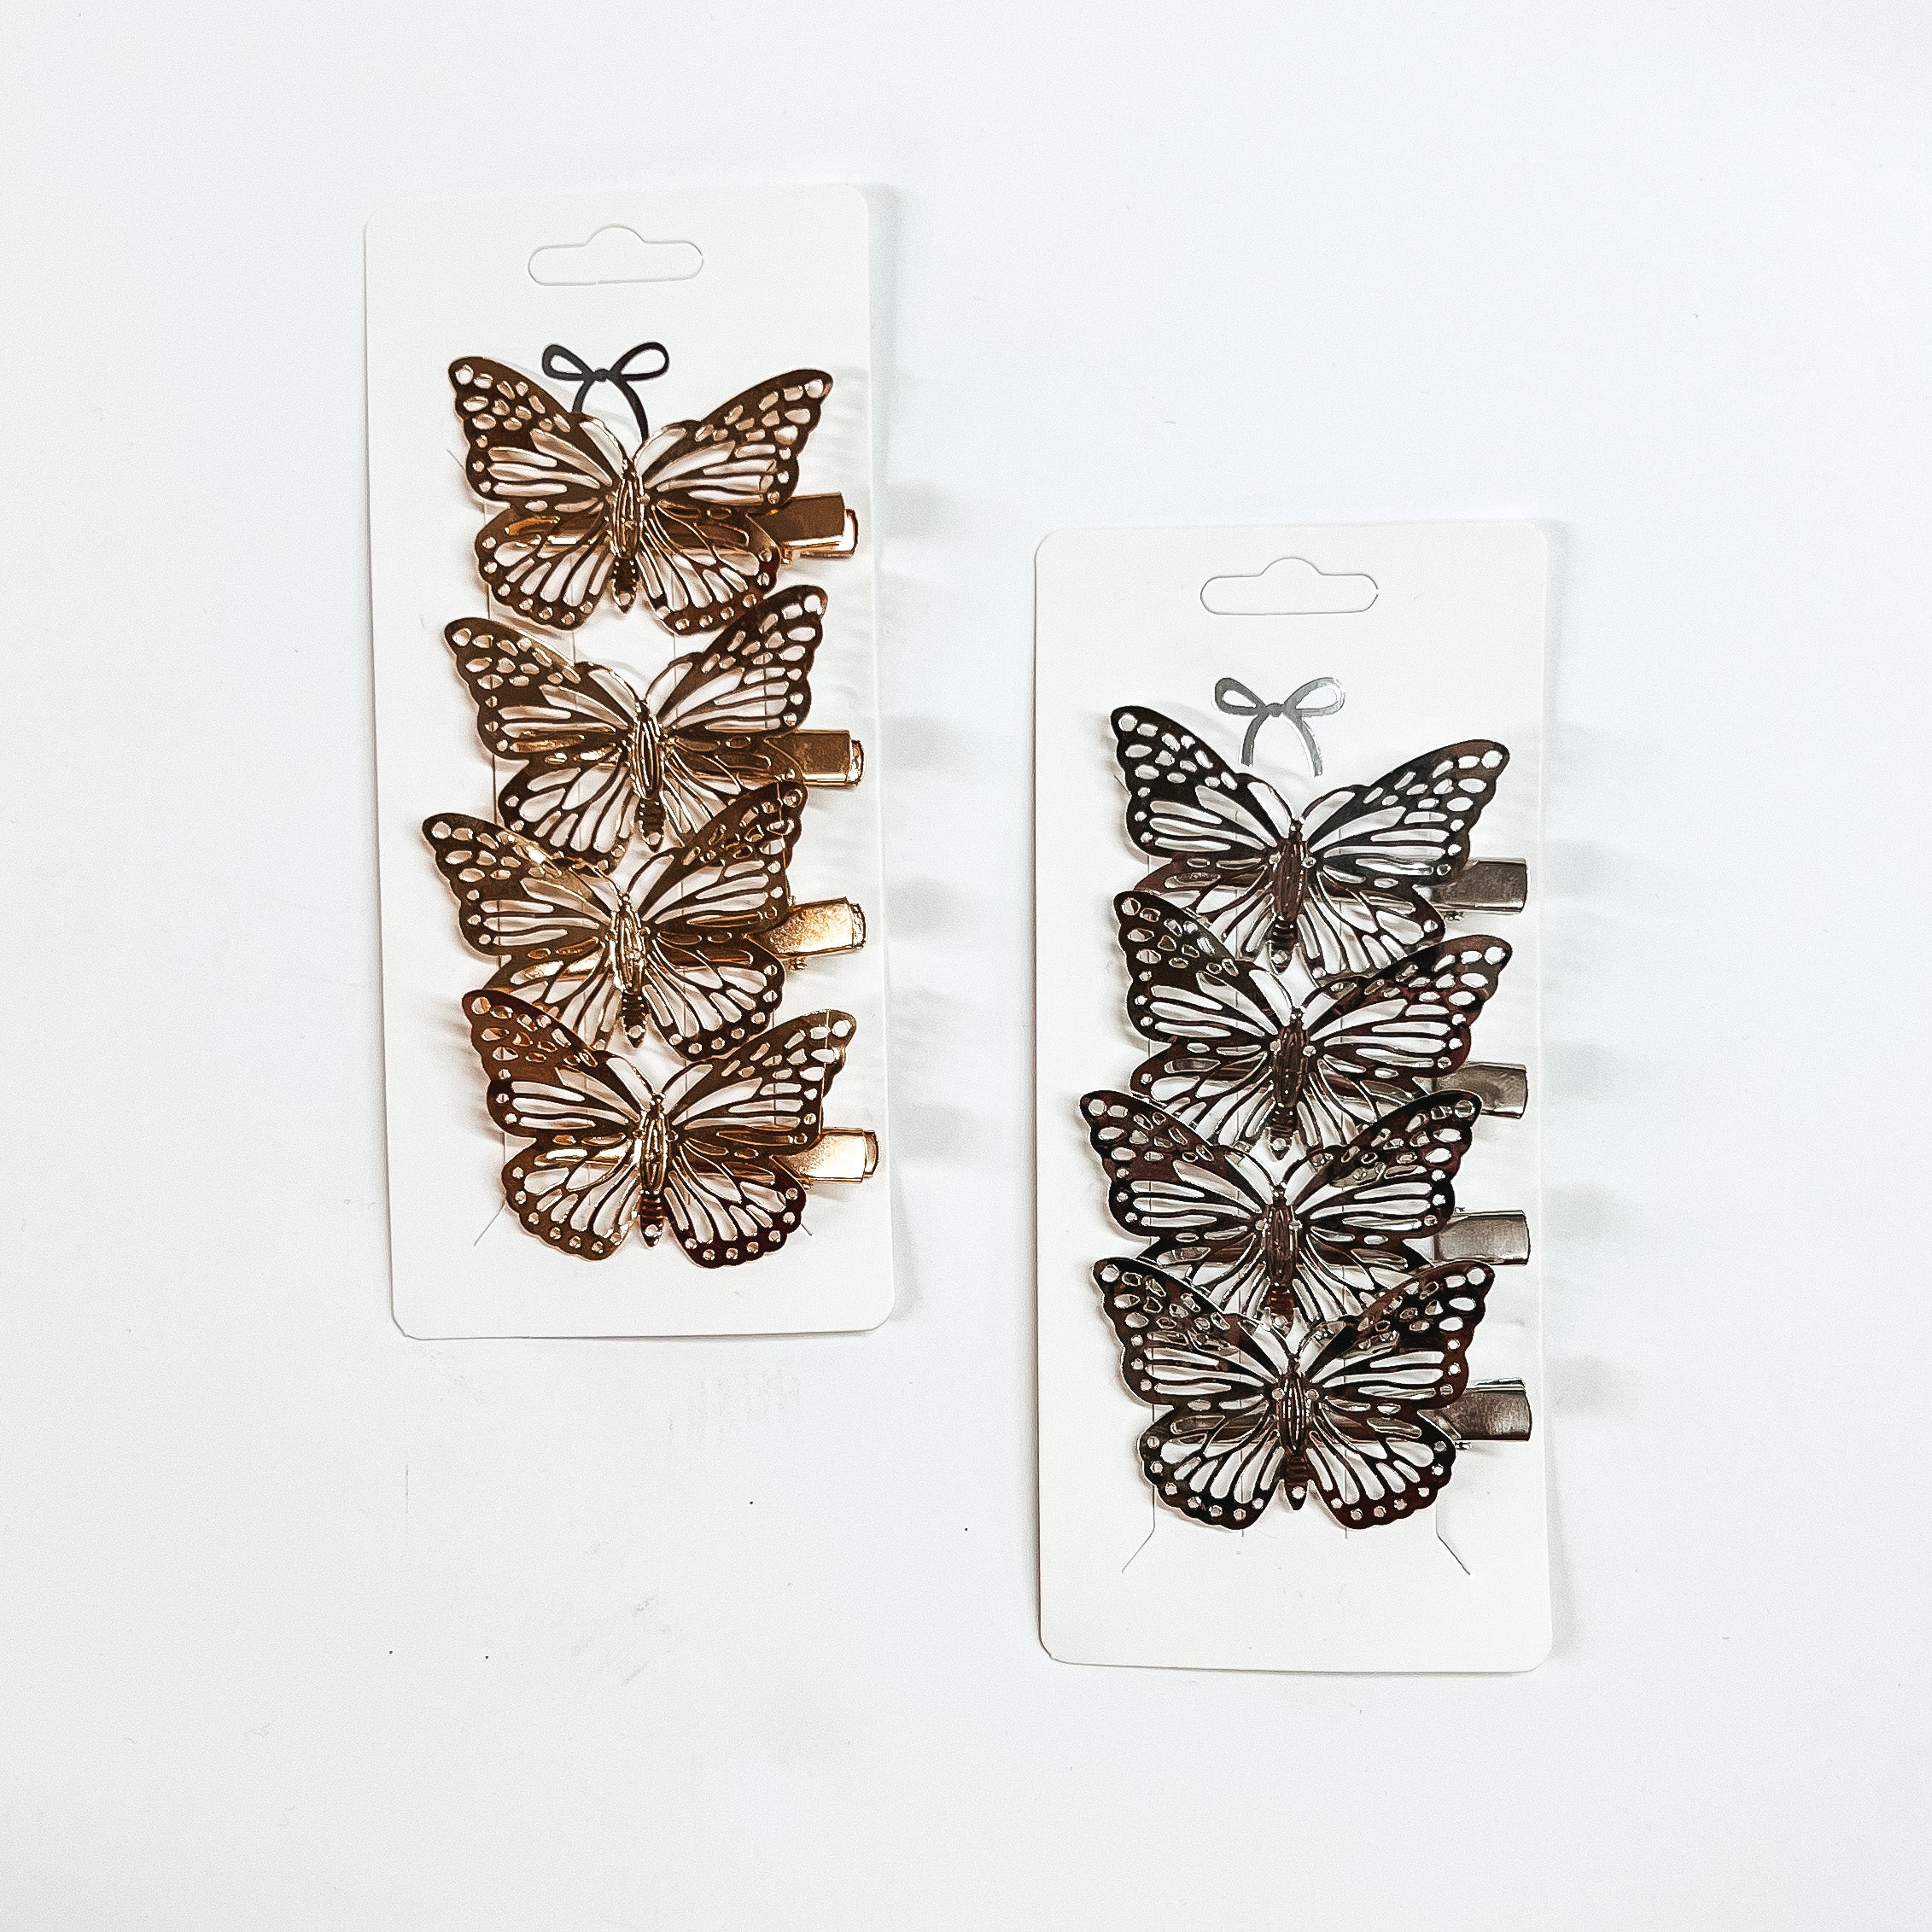 Two sets of four butterfly clips. One set is gold and one set is silver. These clips are pictured on a white background. 